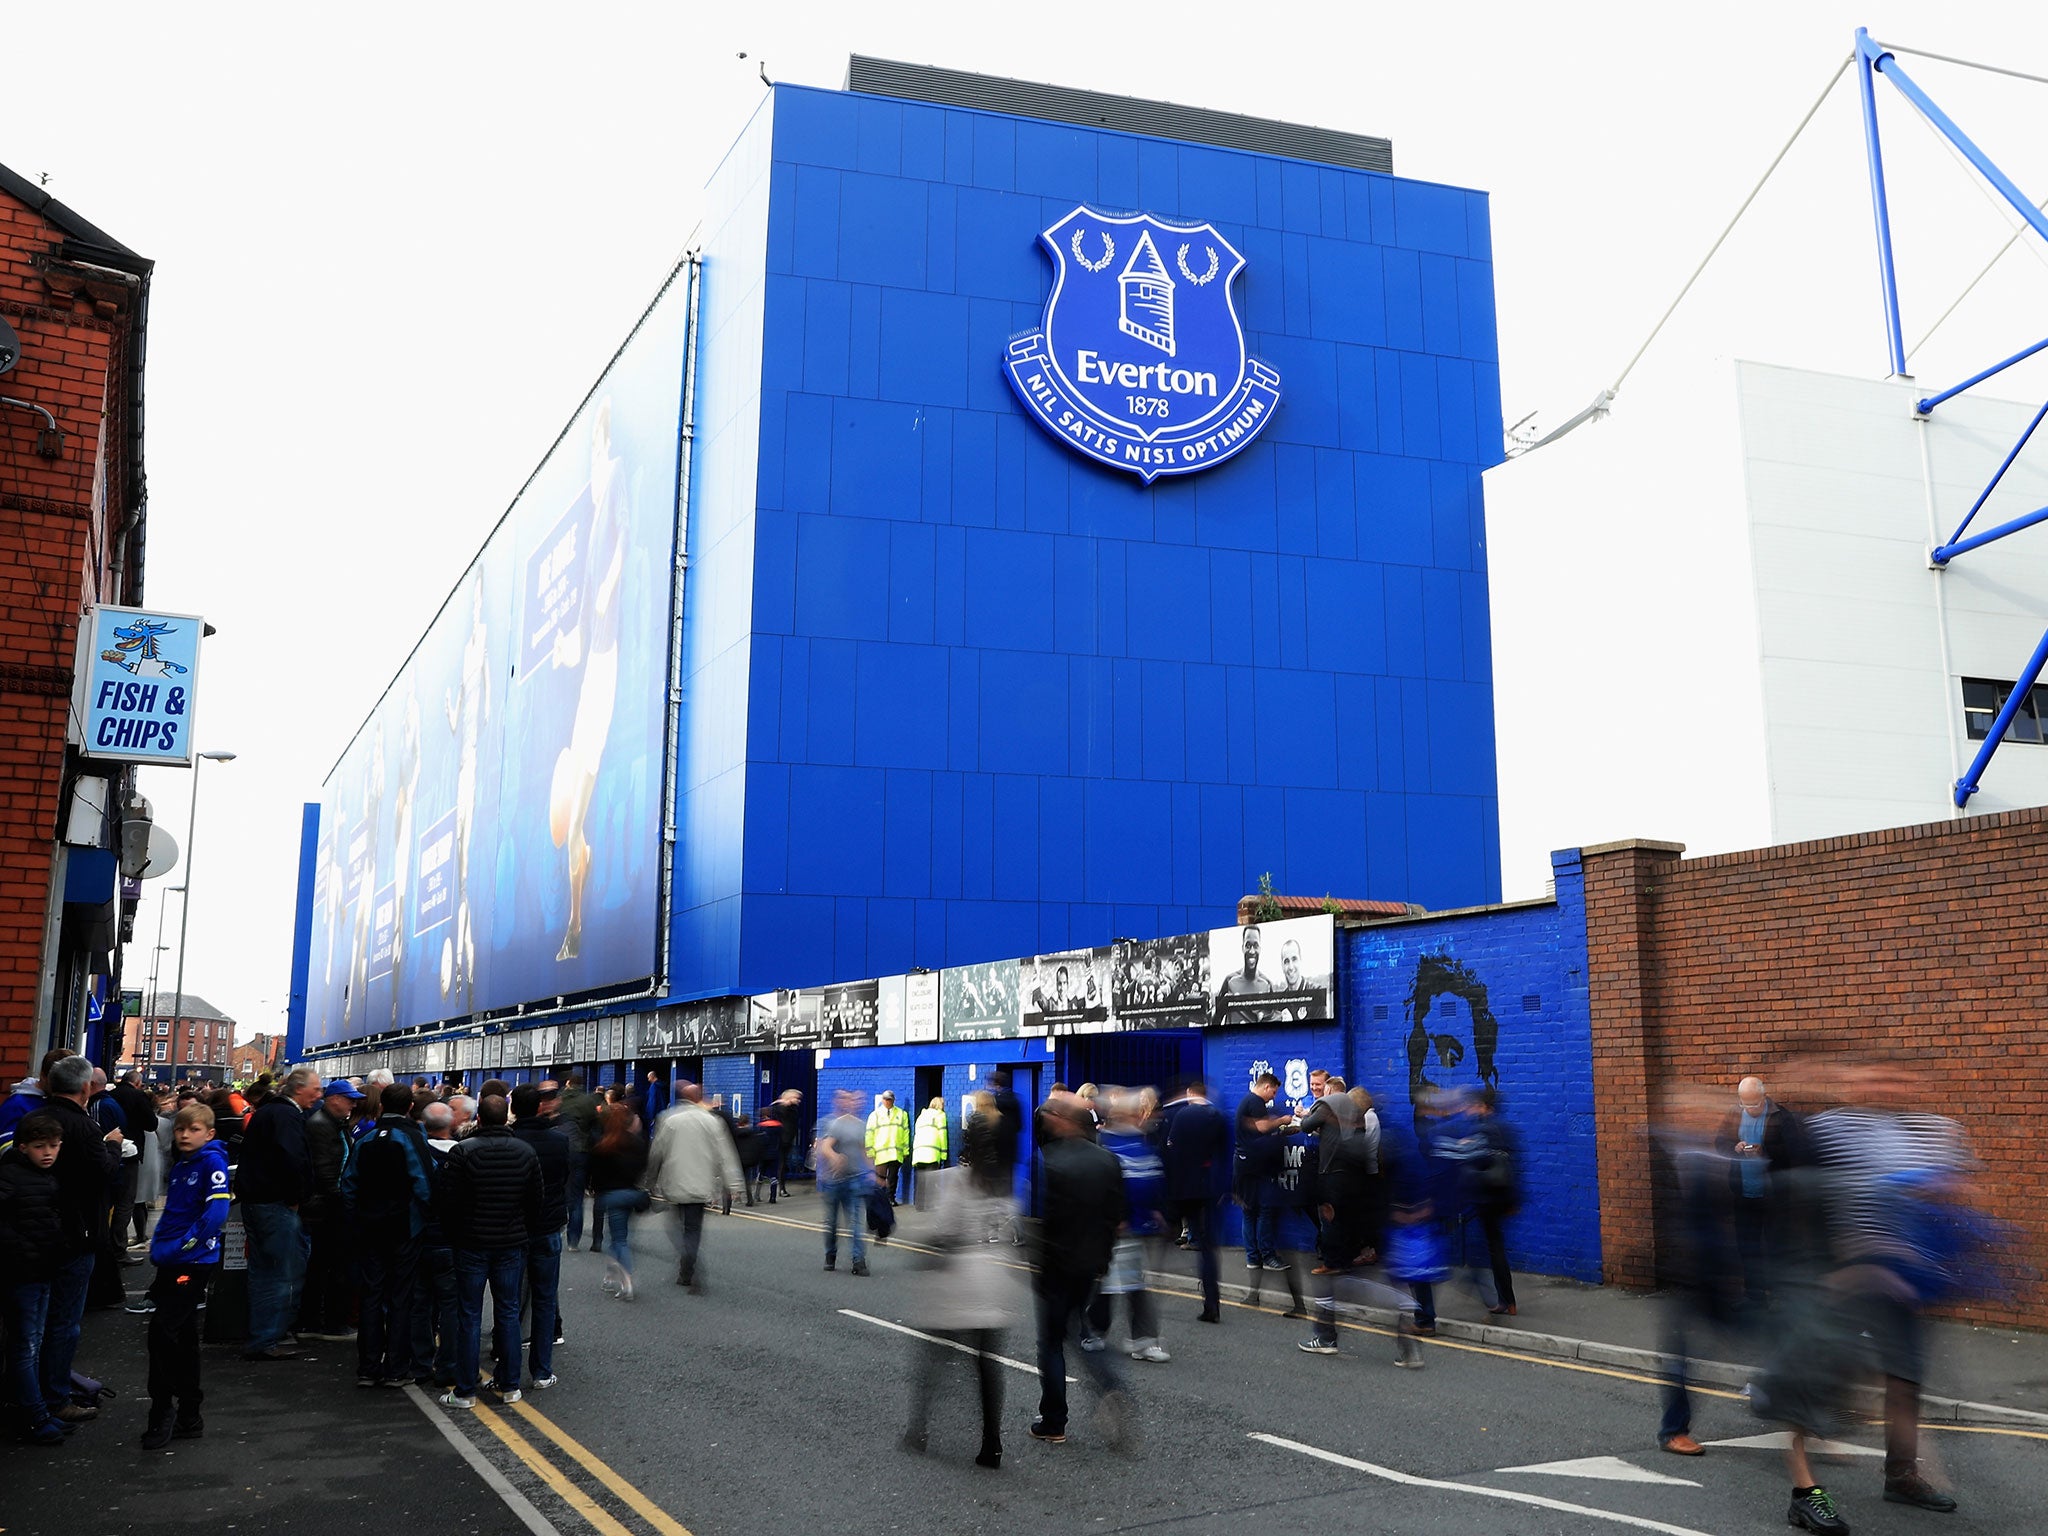 Confidence should be taken from the way Everton are asserting themselves in this year's transfer market